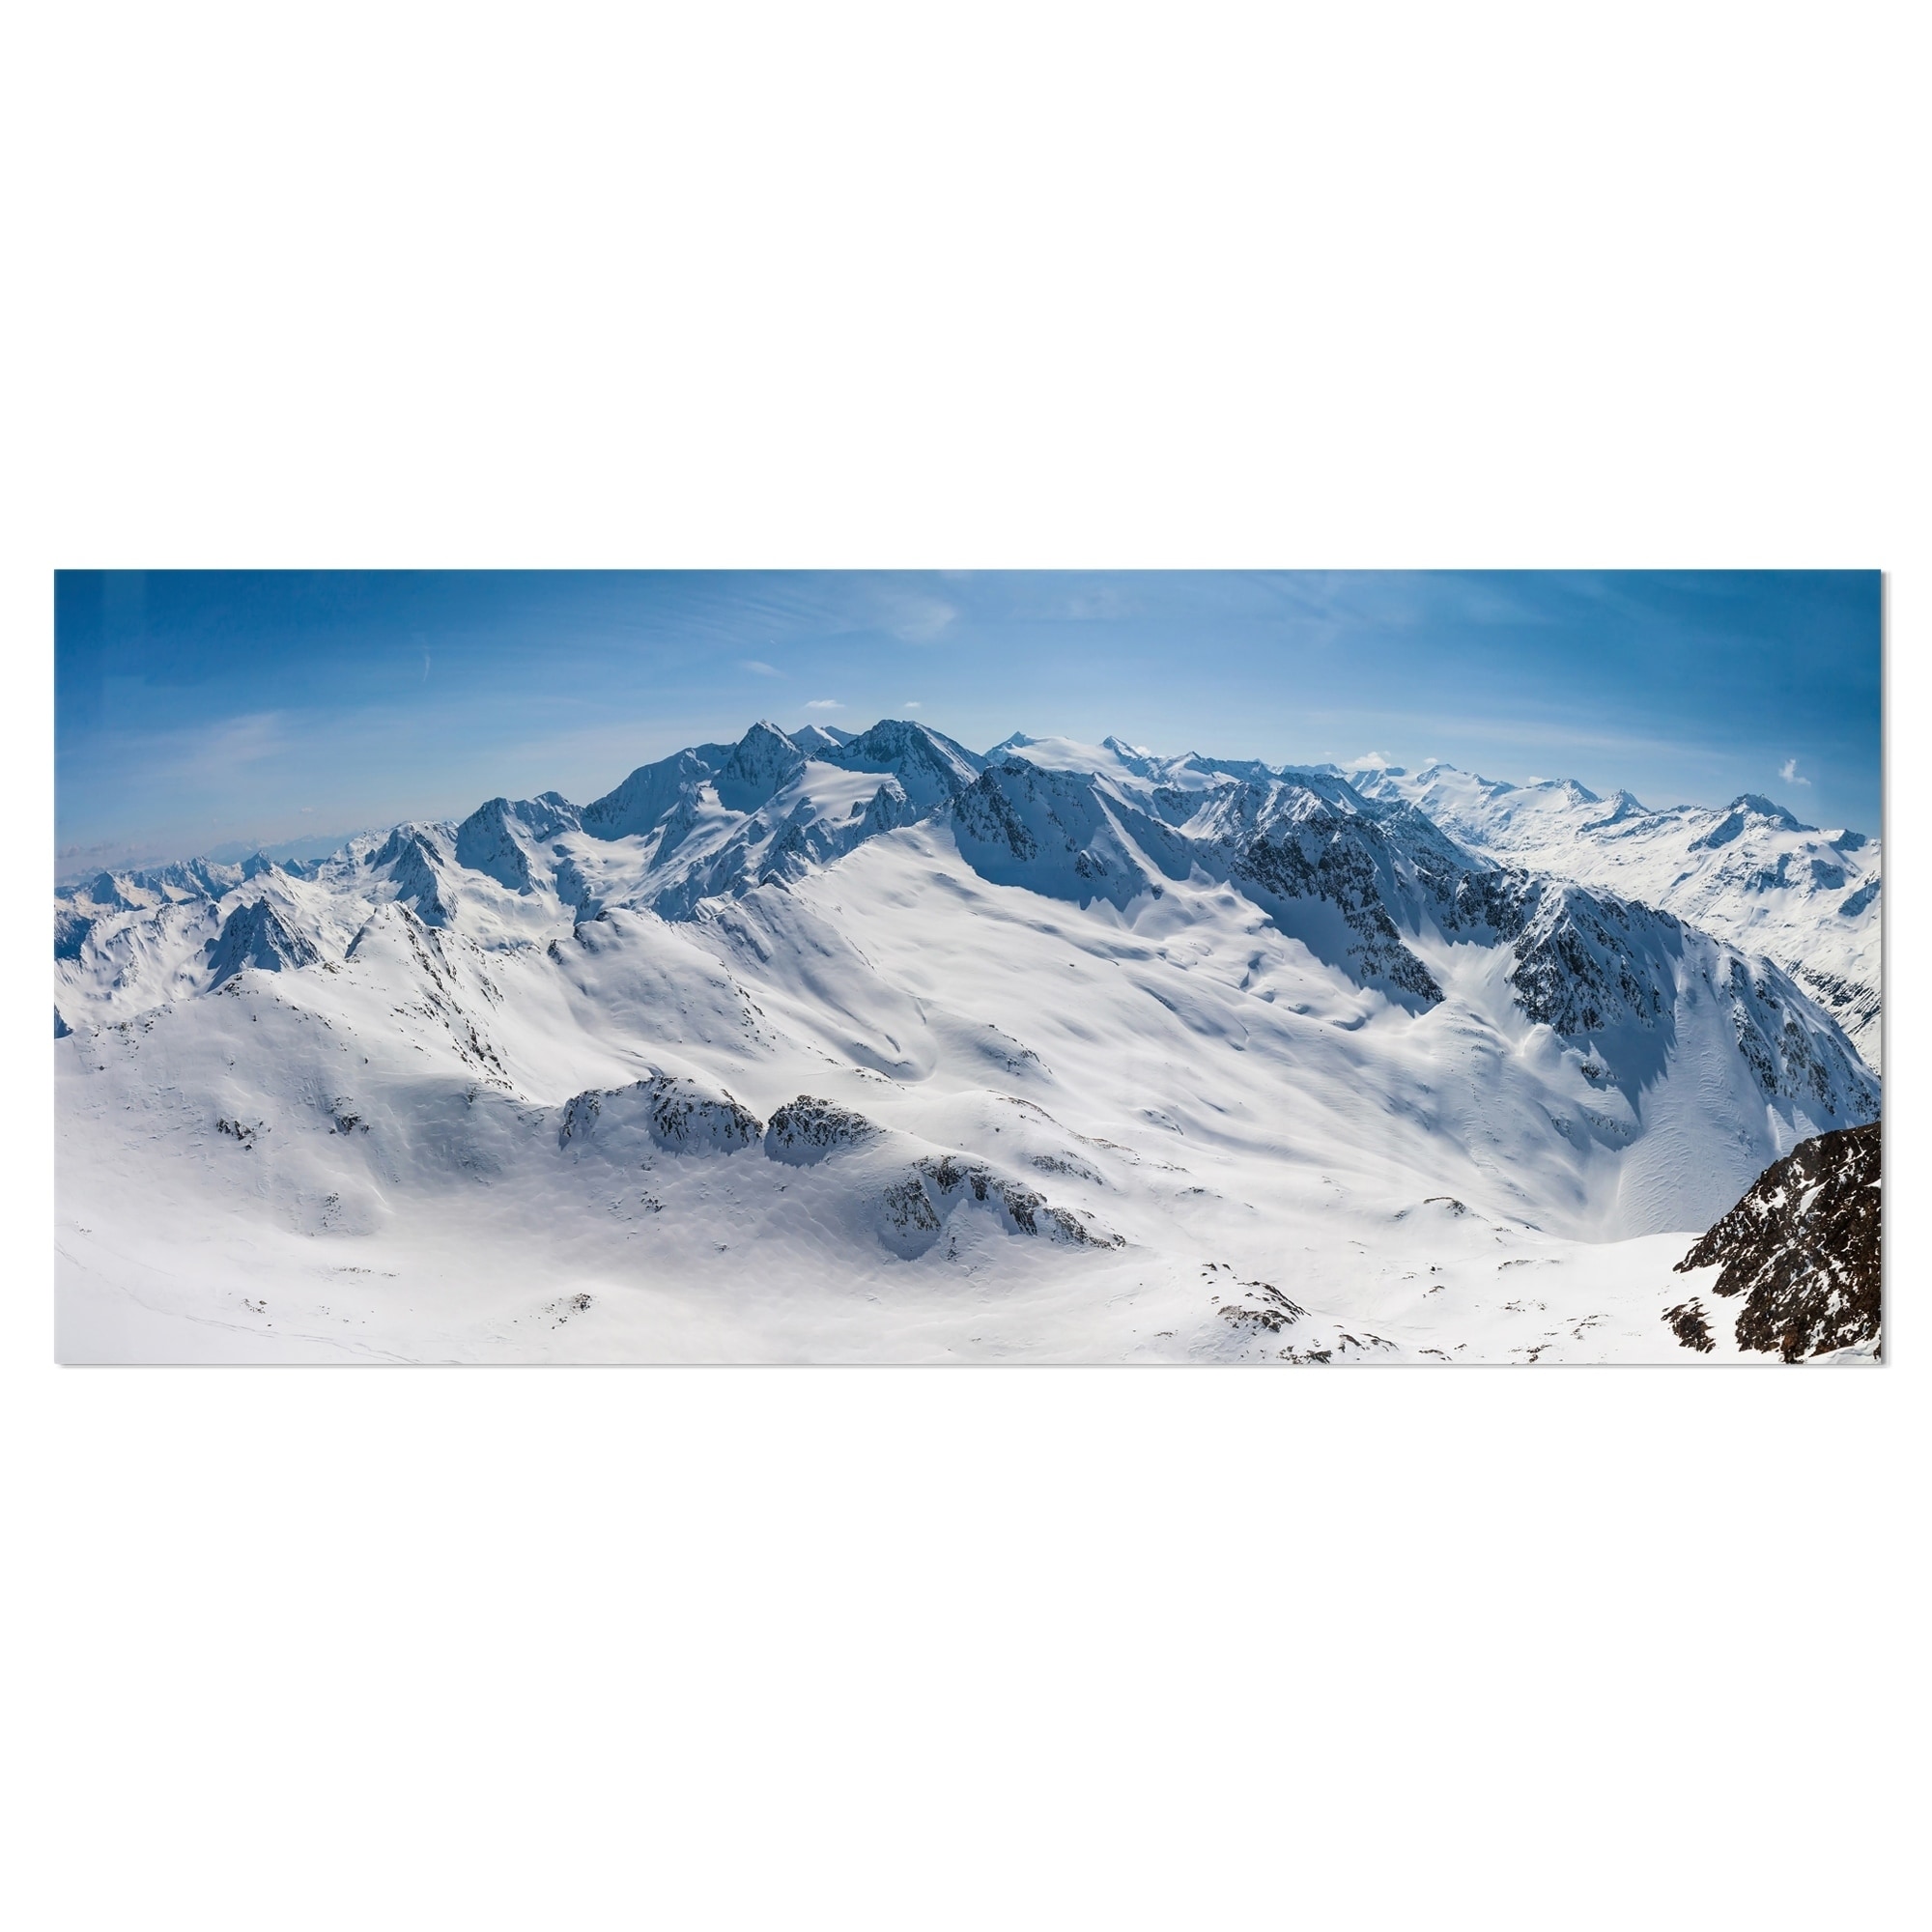 Snowy Mountains Panoramic View - Landscape Glossy Metal Wall Art